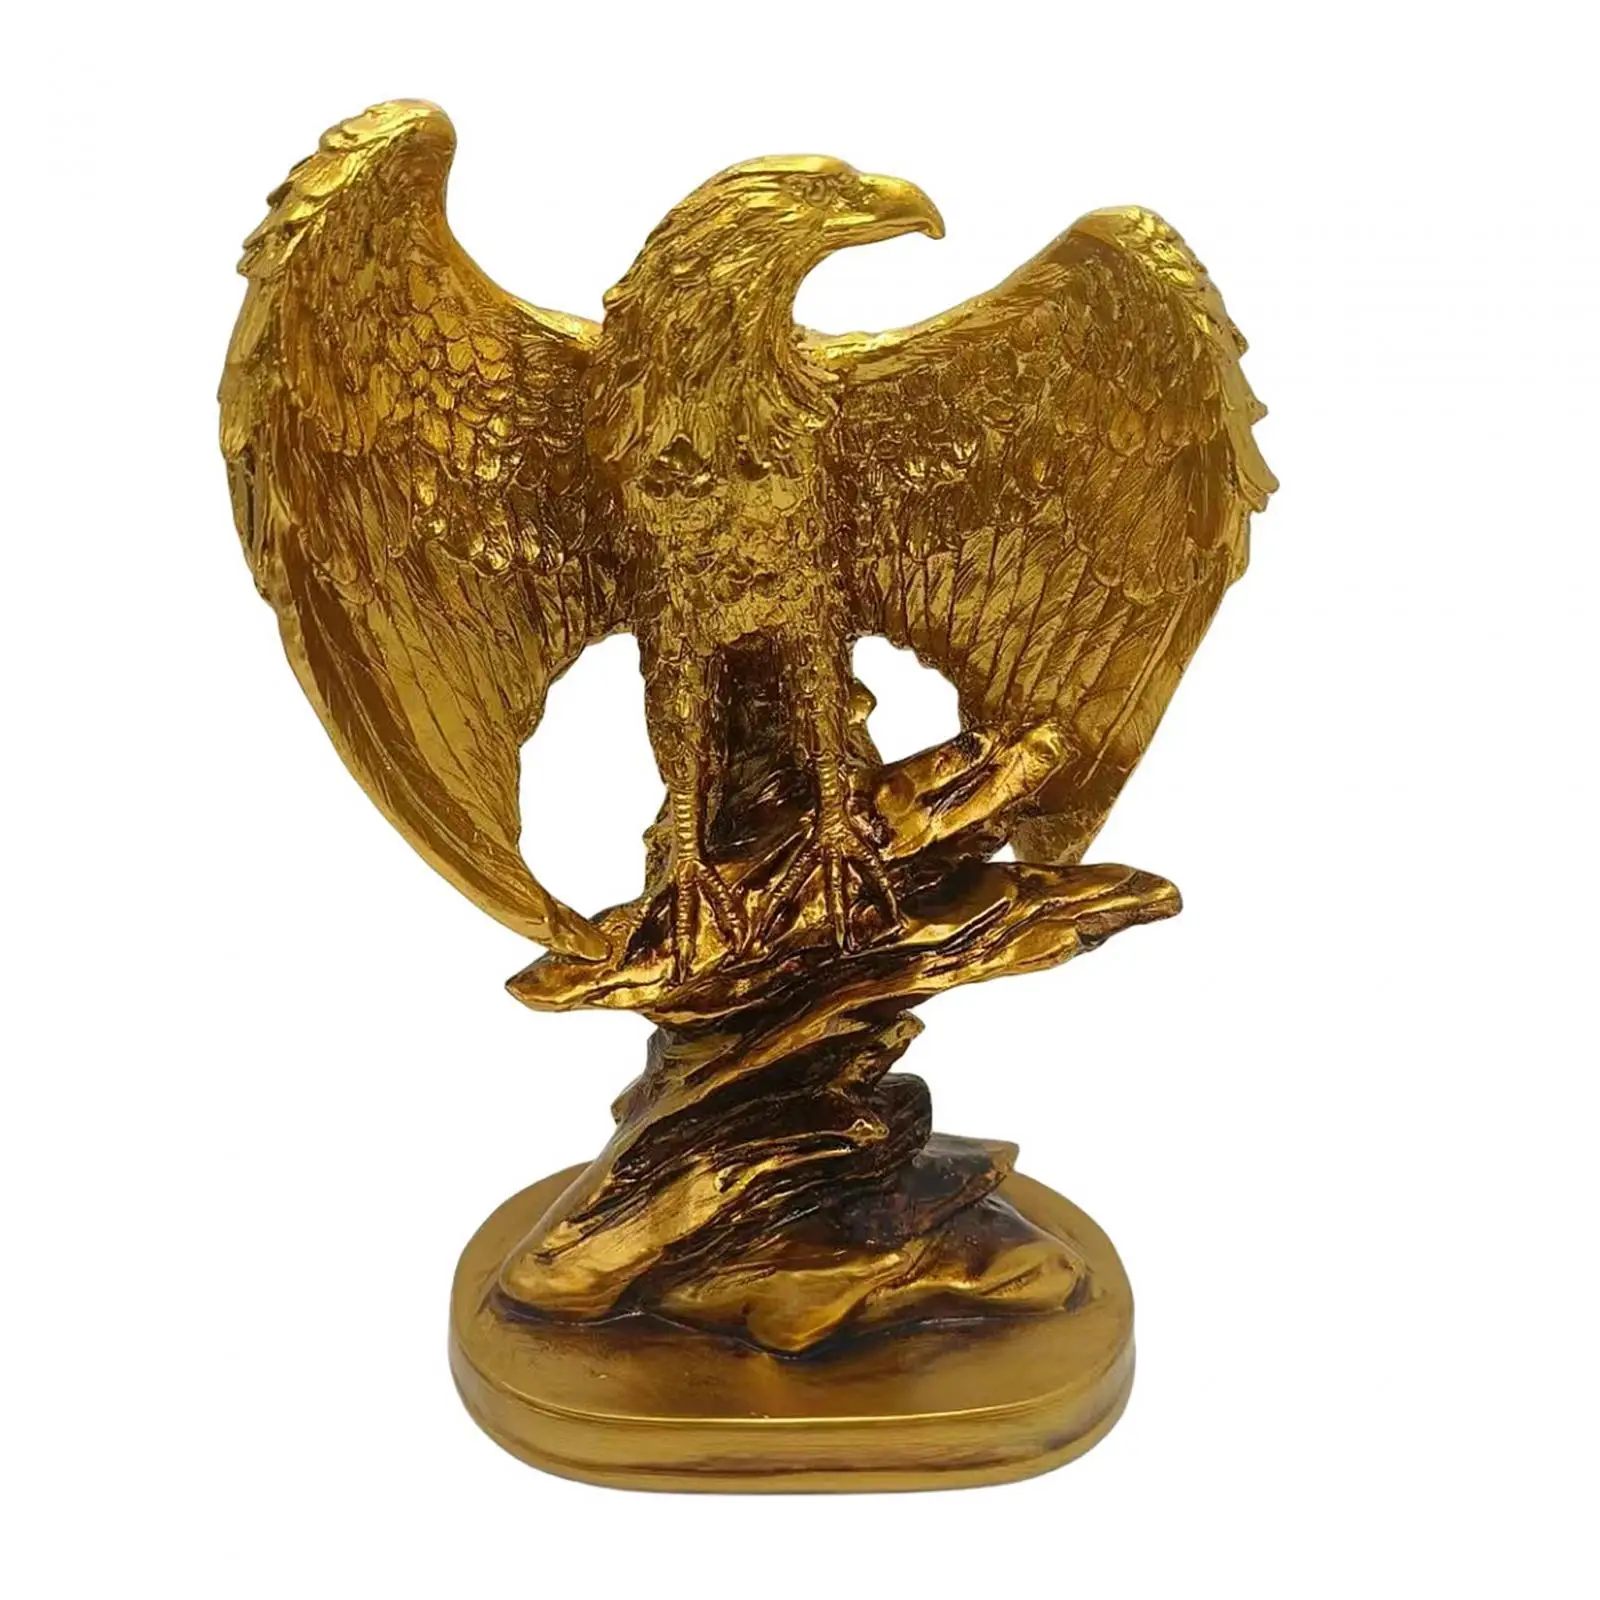 

Eagle Statue Art Gift Tabletop Centerpiece Decoration Modern Animal Sculpture Adornment for Cabinet Office Dining Room Cafe Desk